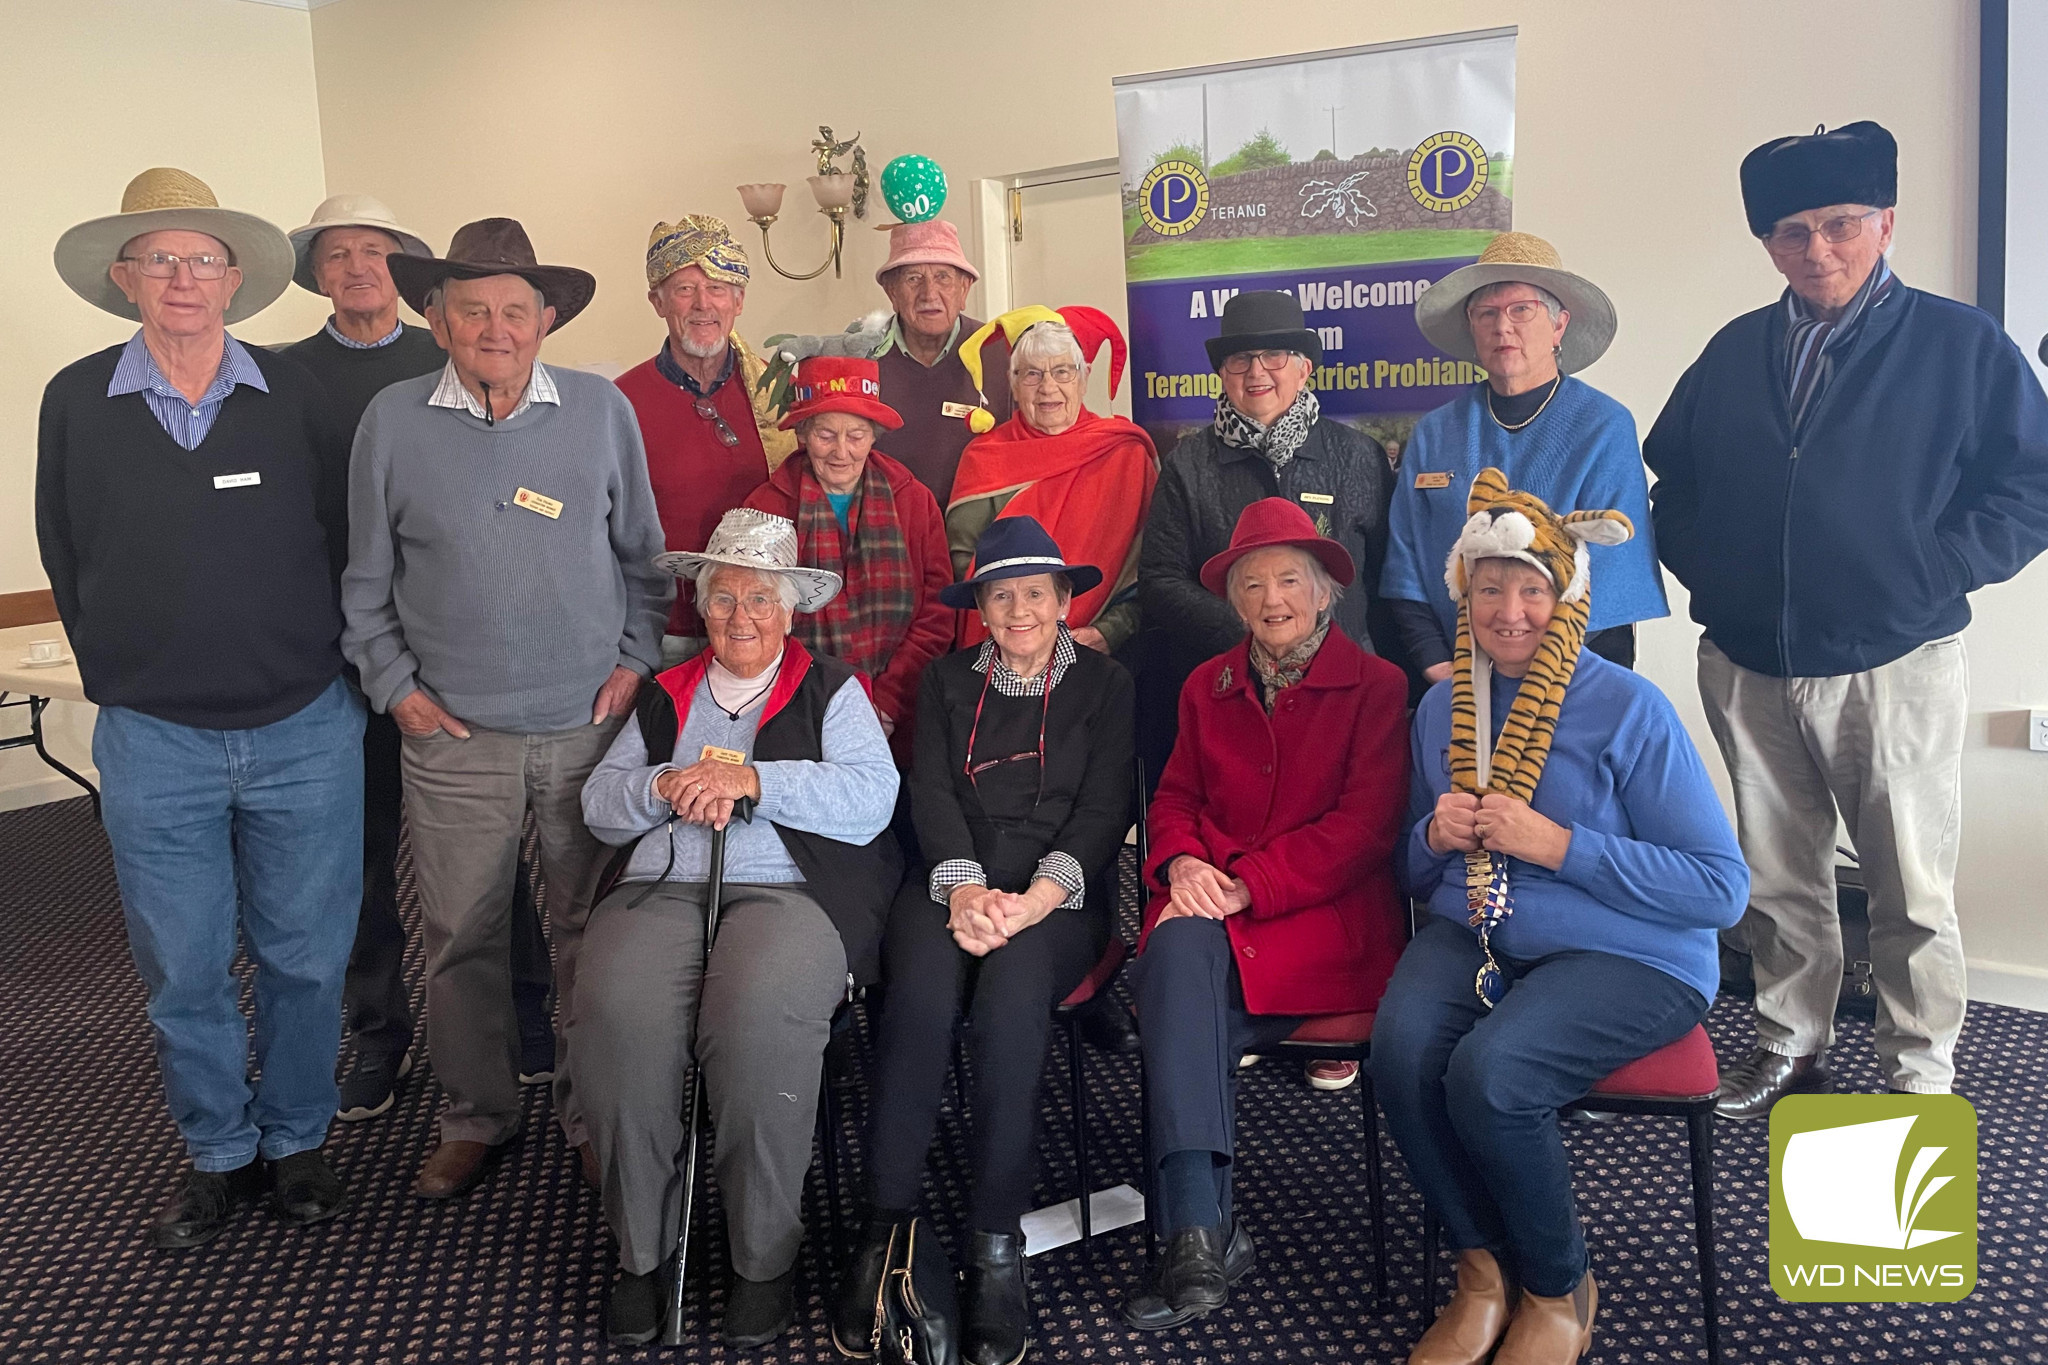 All smiles: Terang and District Probus Club members held a crazy hat day at its most recent meeting.